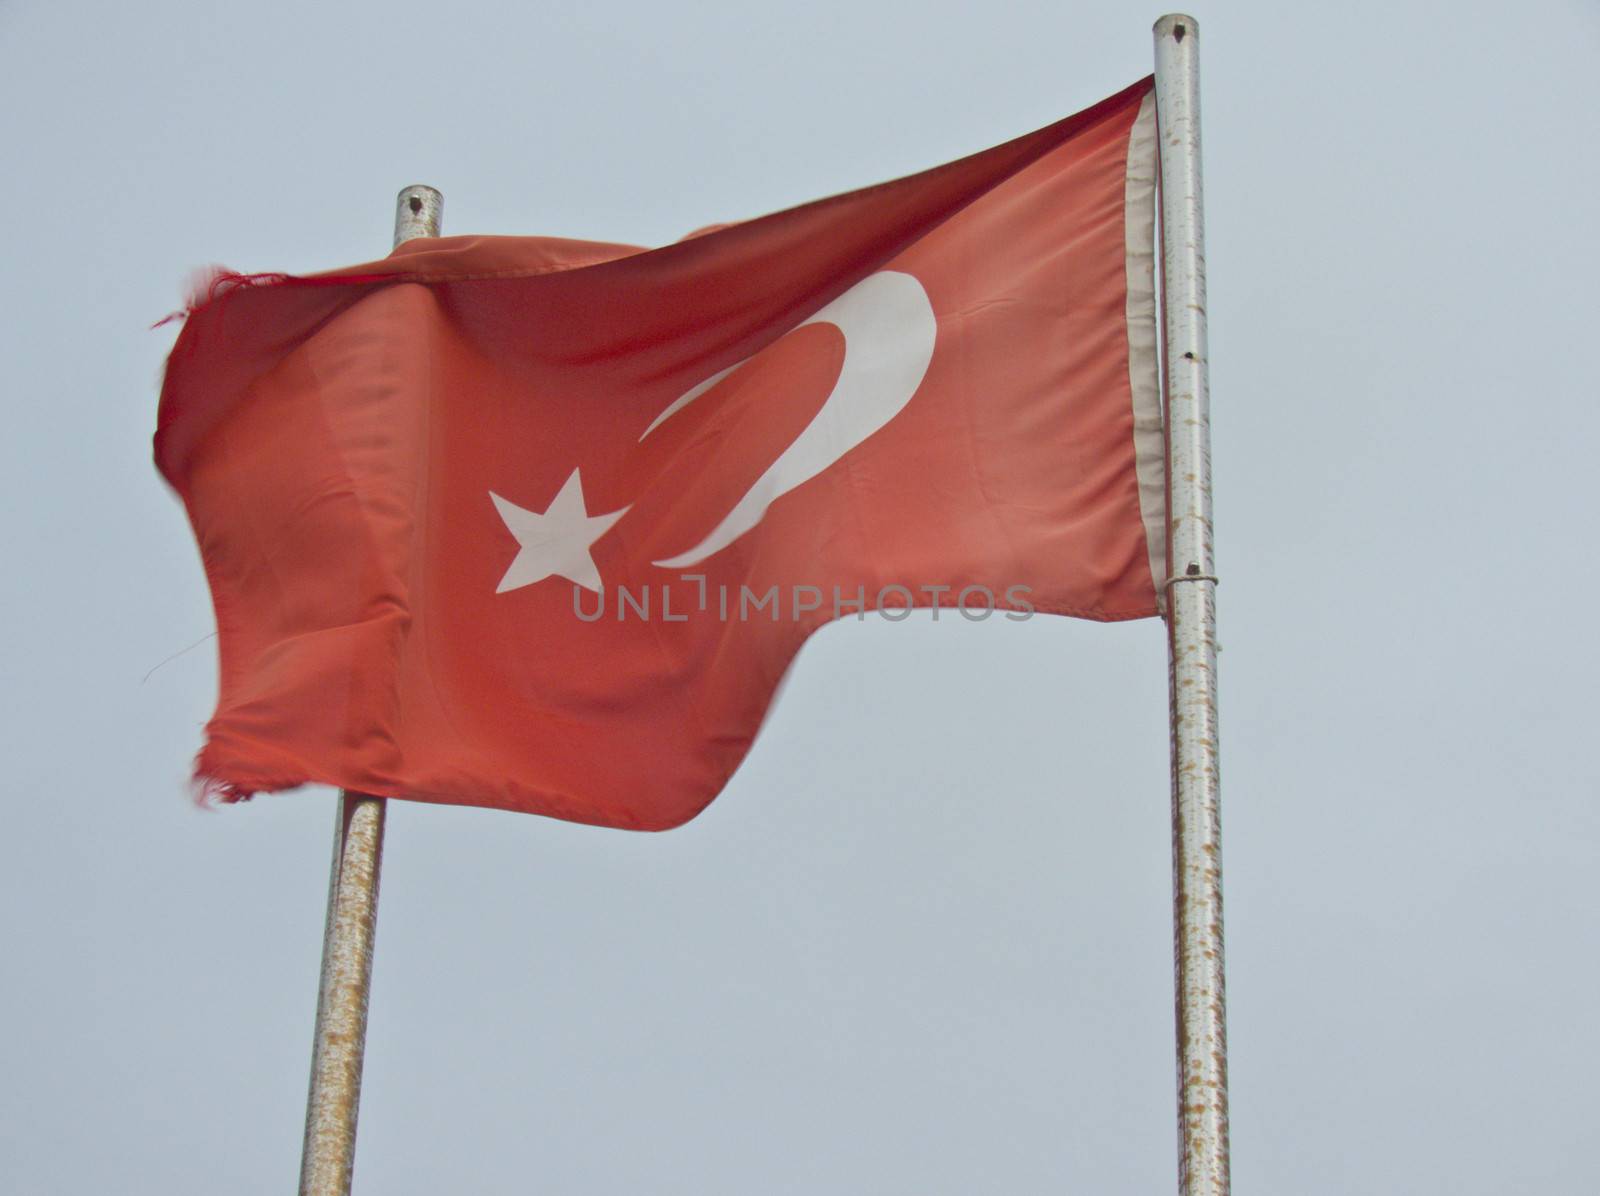 Scarlet Turkish flag flies from the strong wind